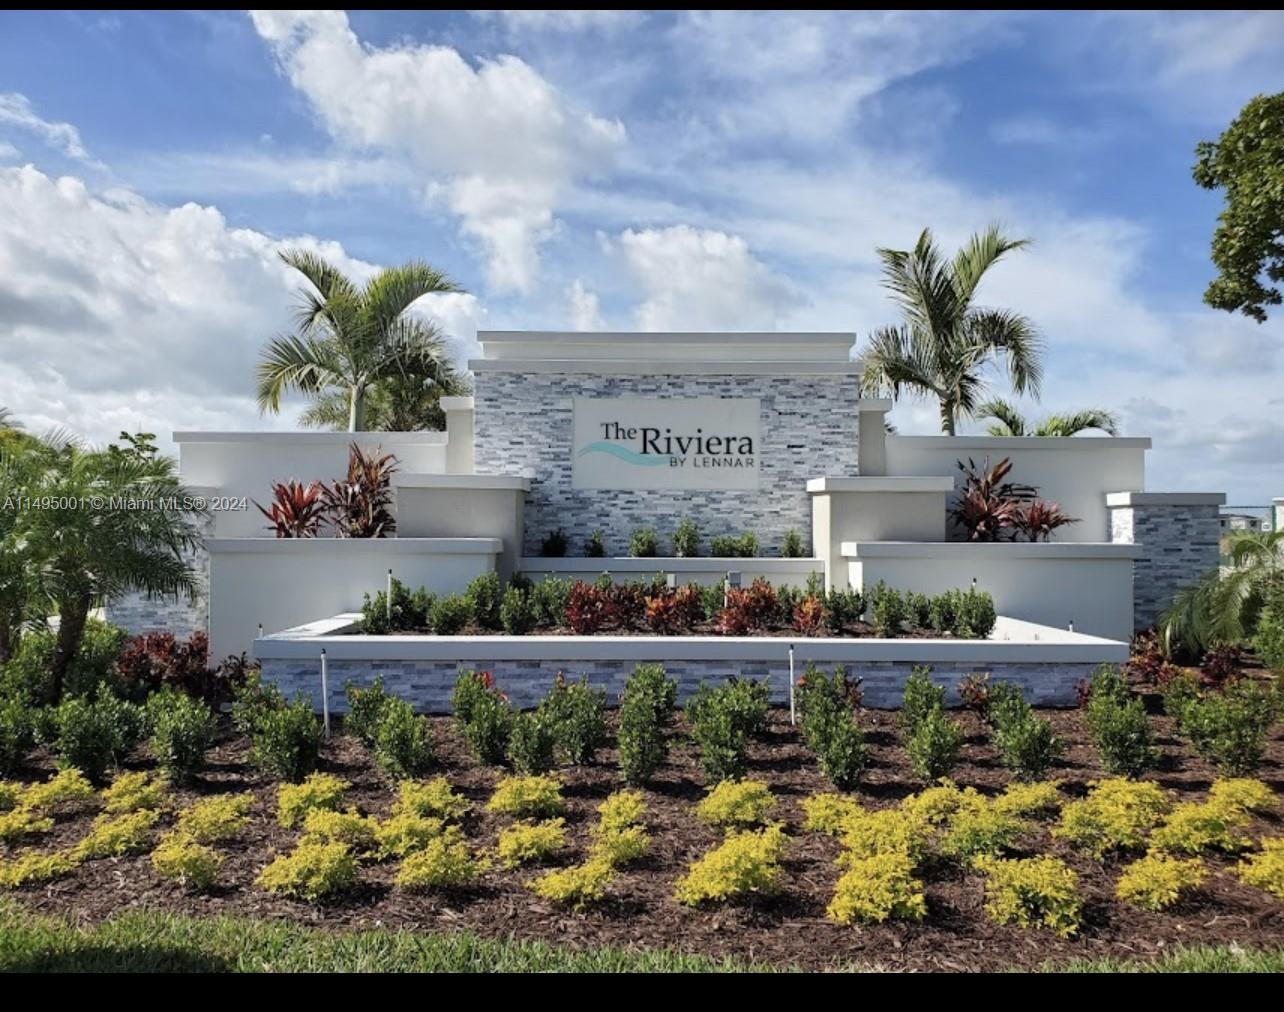 Exclusive Oasis in Homestead. Townhouse for sale located at a Lennar Community of The Riviera. This home features 3 bedrooms and 2.5 bathrooms with a Smart Home System, Stainless Steel Appliances, and a great patio excellent for entertainment.